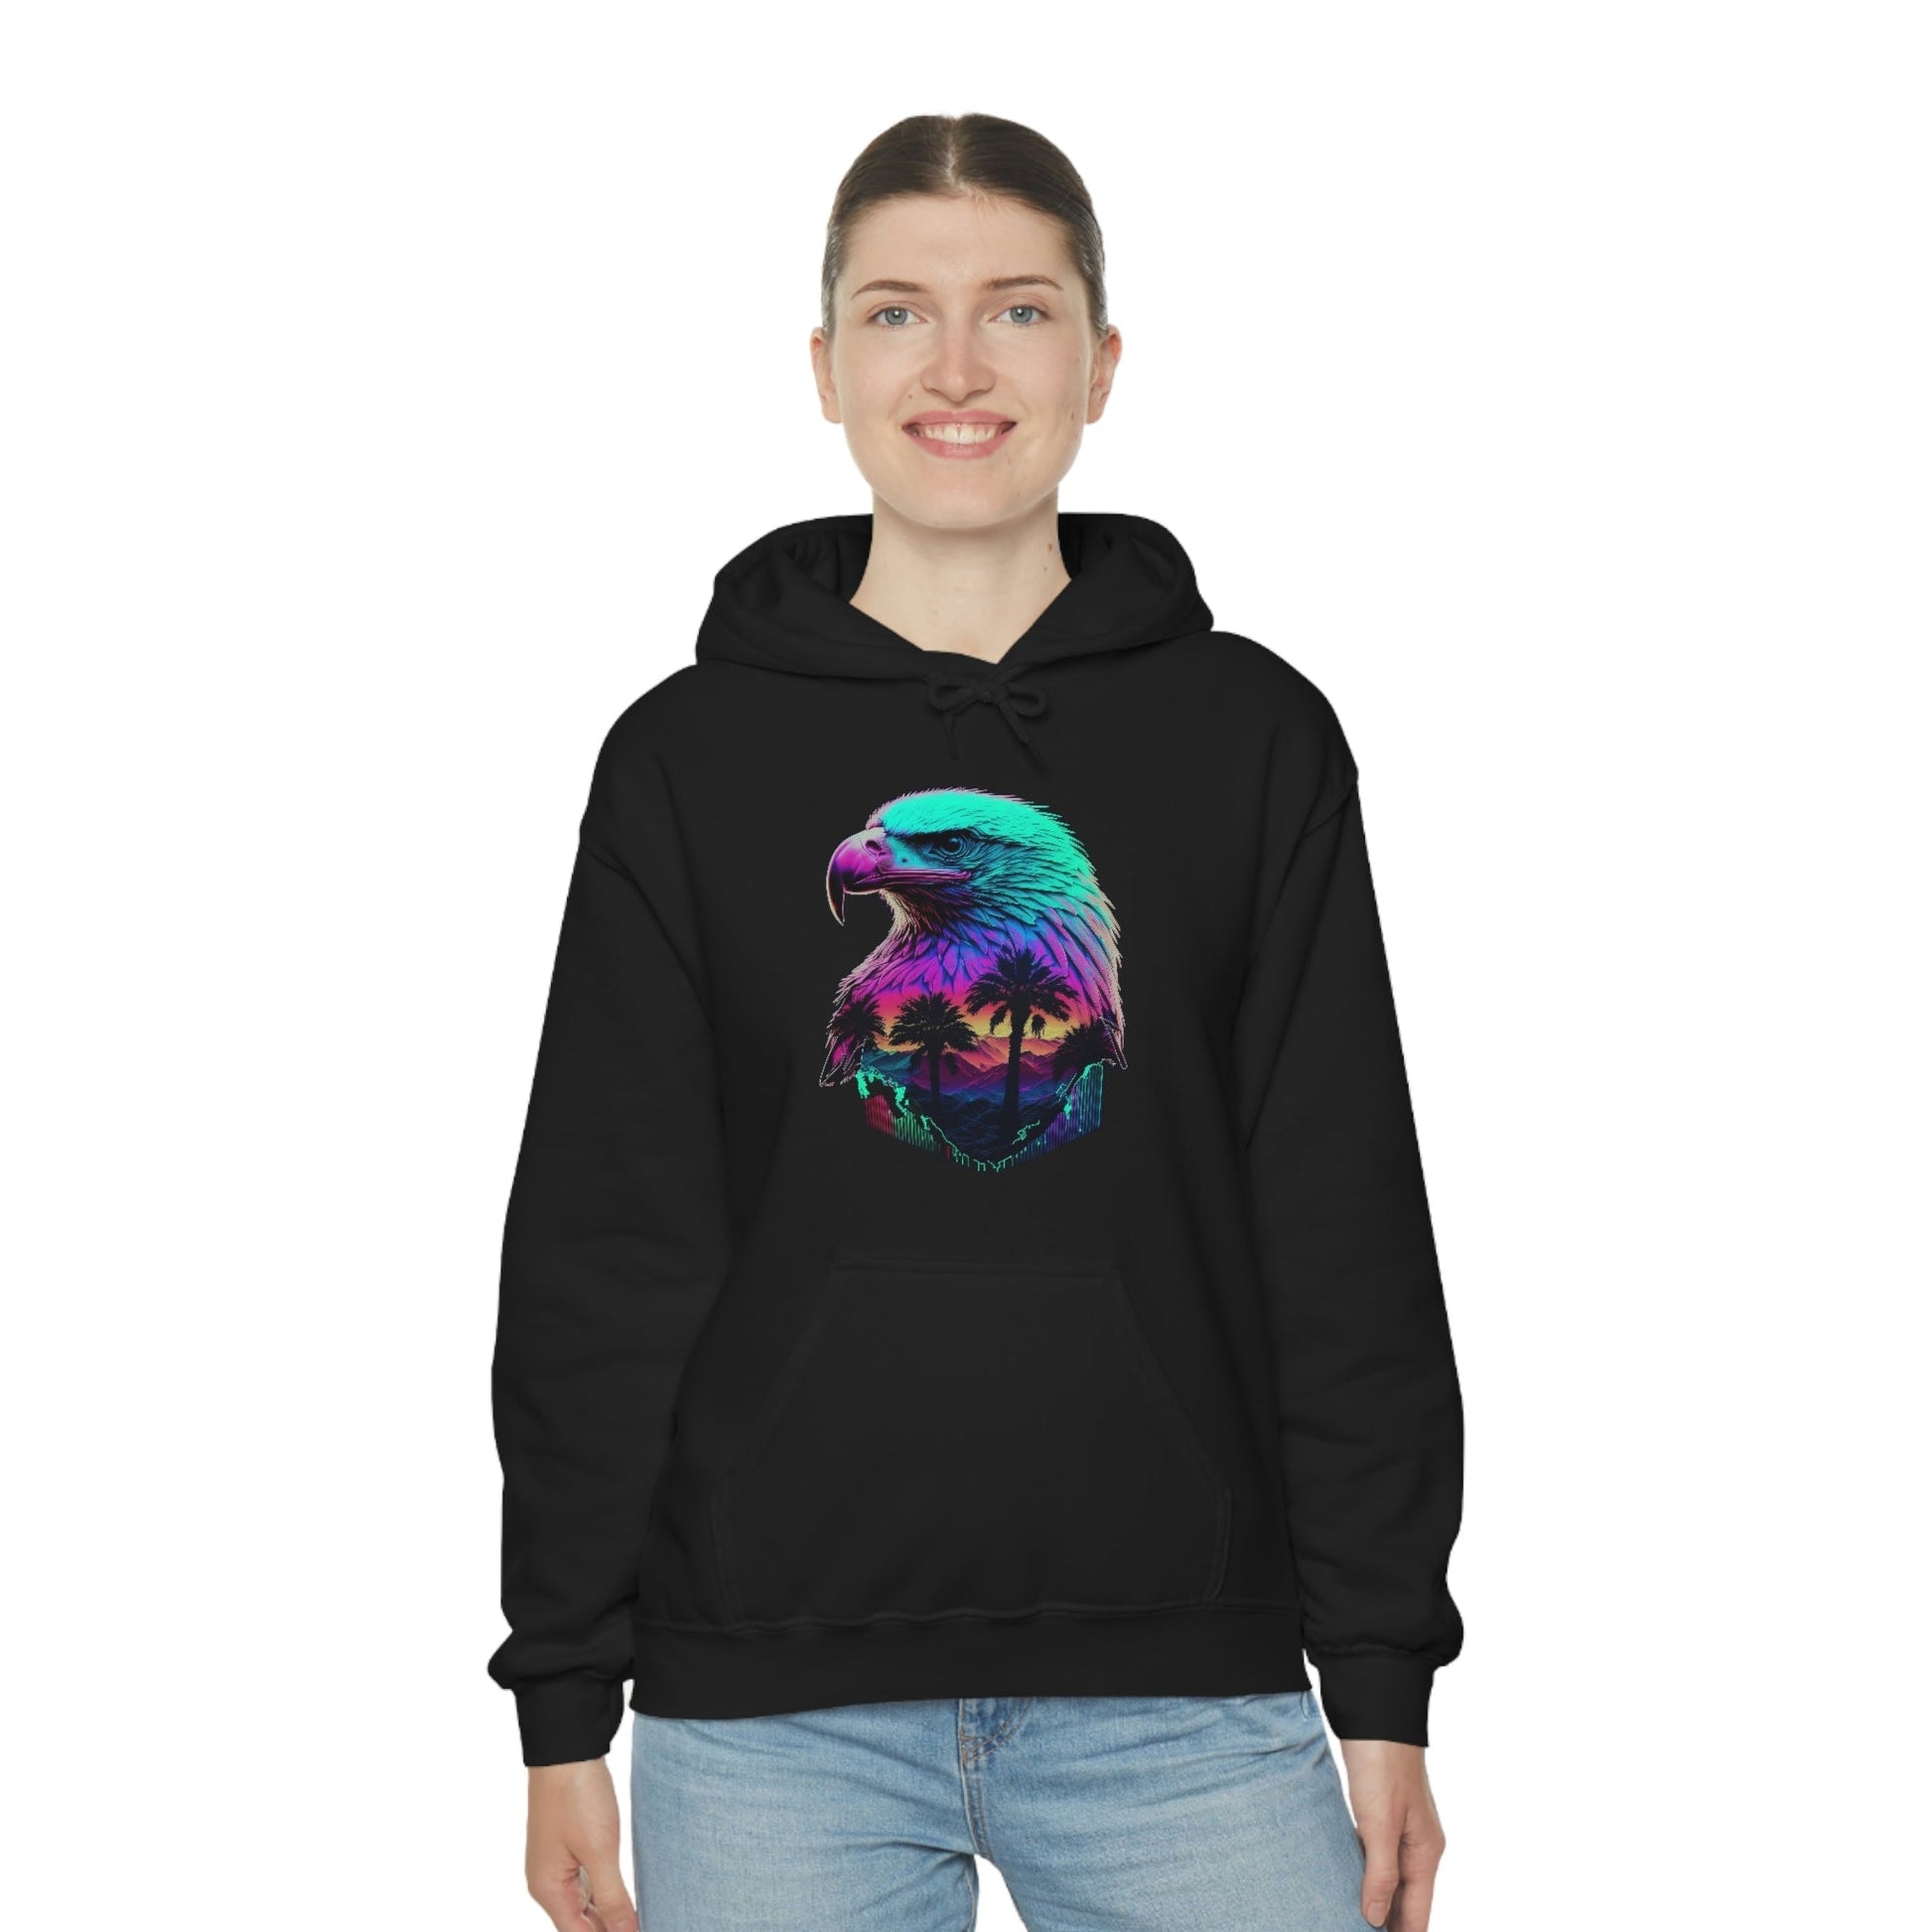 Womens and Mens Patriotic Hoodies - Land of the Vapor, Home of the Wave - Bind on Equip - 19440781292044521688